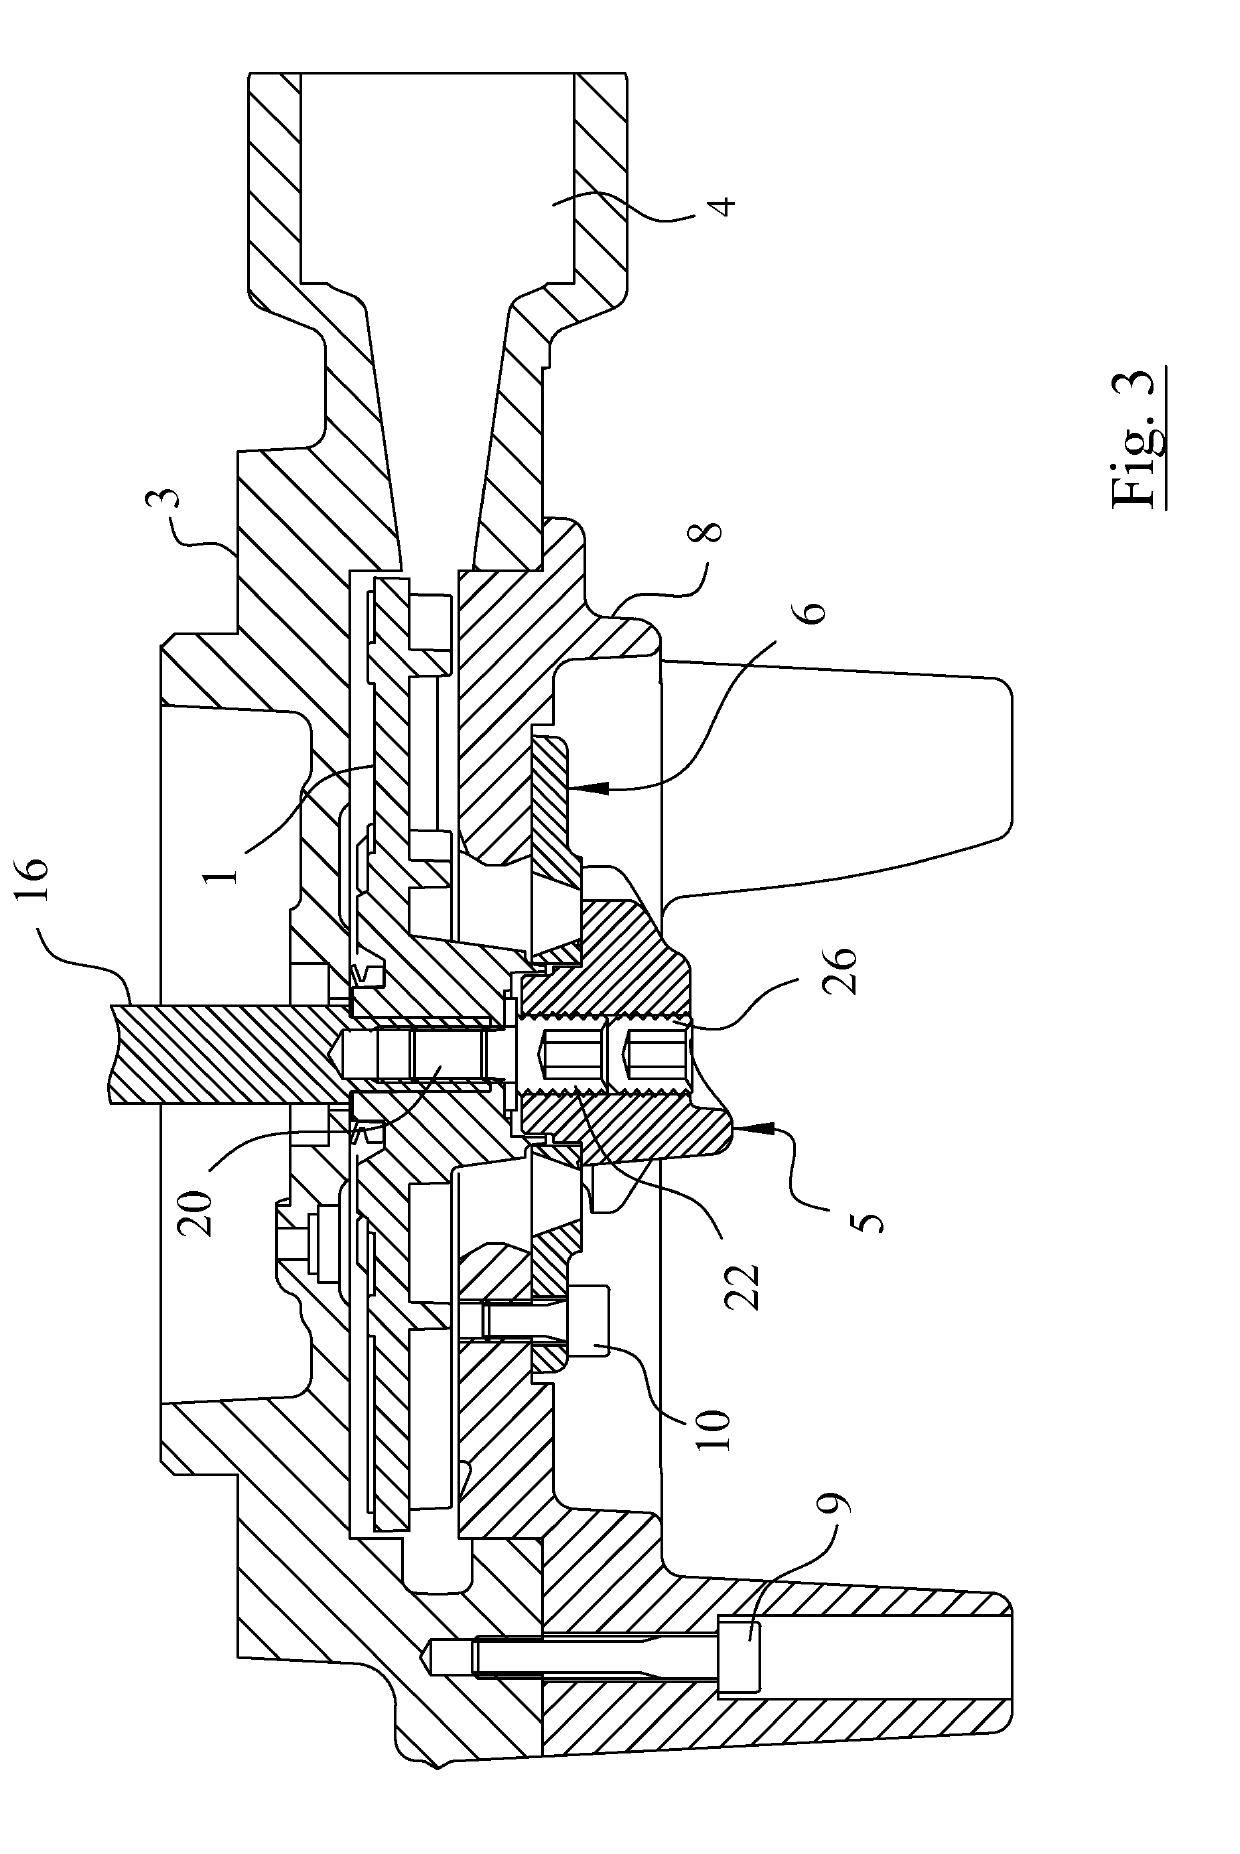 A method for providing an axial gap in a cutter assembly of a grinder pump, and a grinder pump comprising a shim configured for providing said axial gap